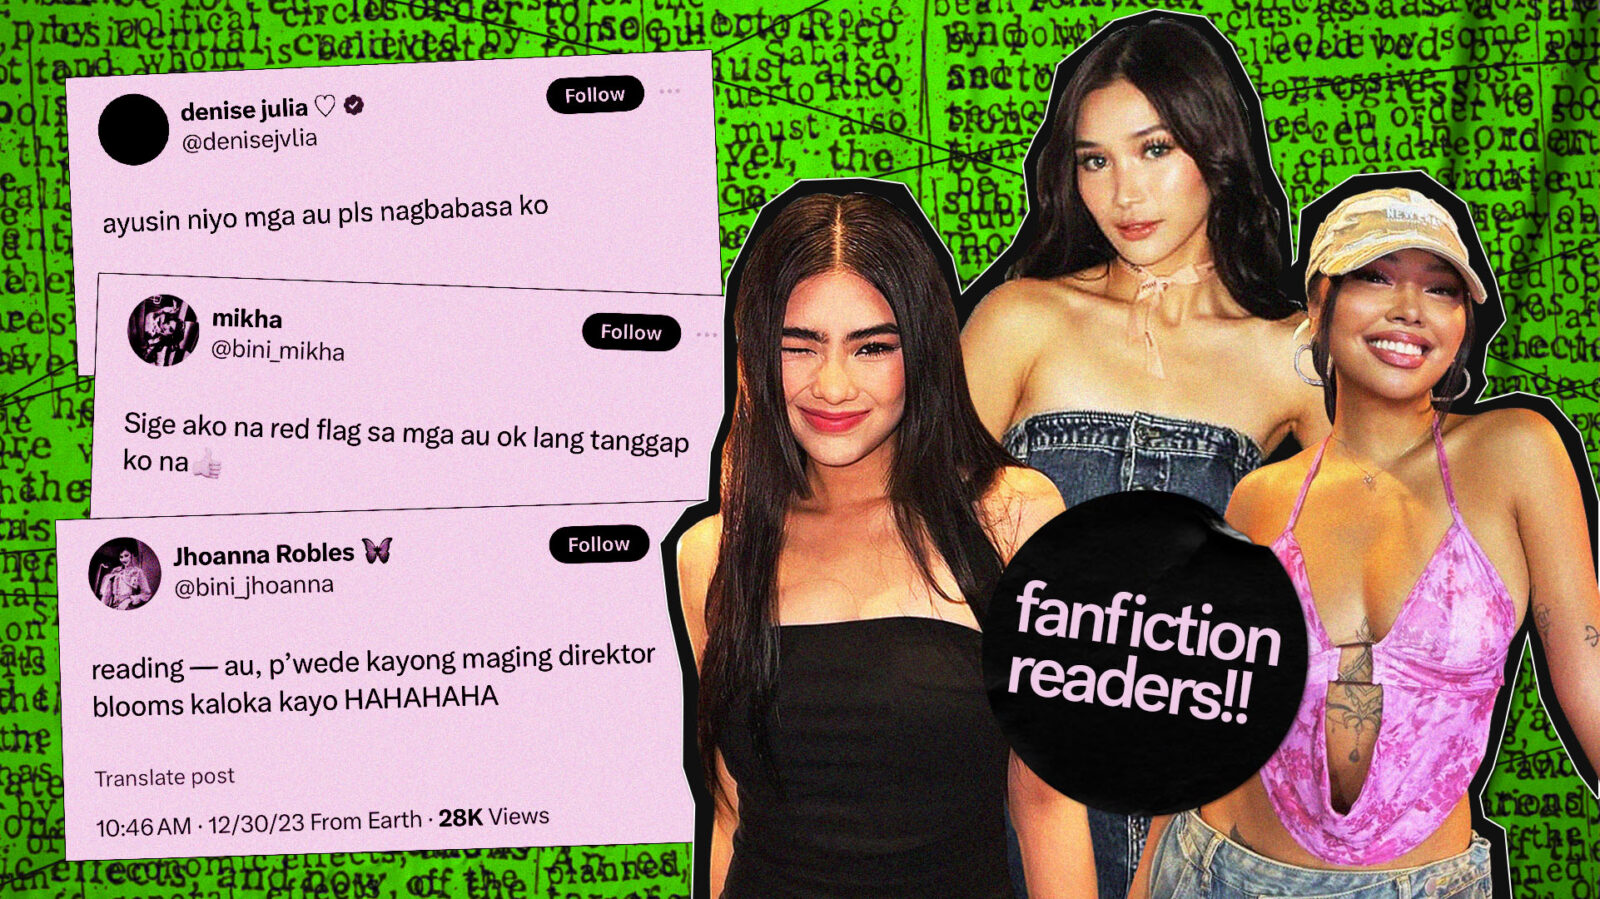 These 7 Pinoy Celebs Are AU and Fanfiction Readers, Too